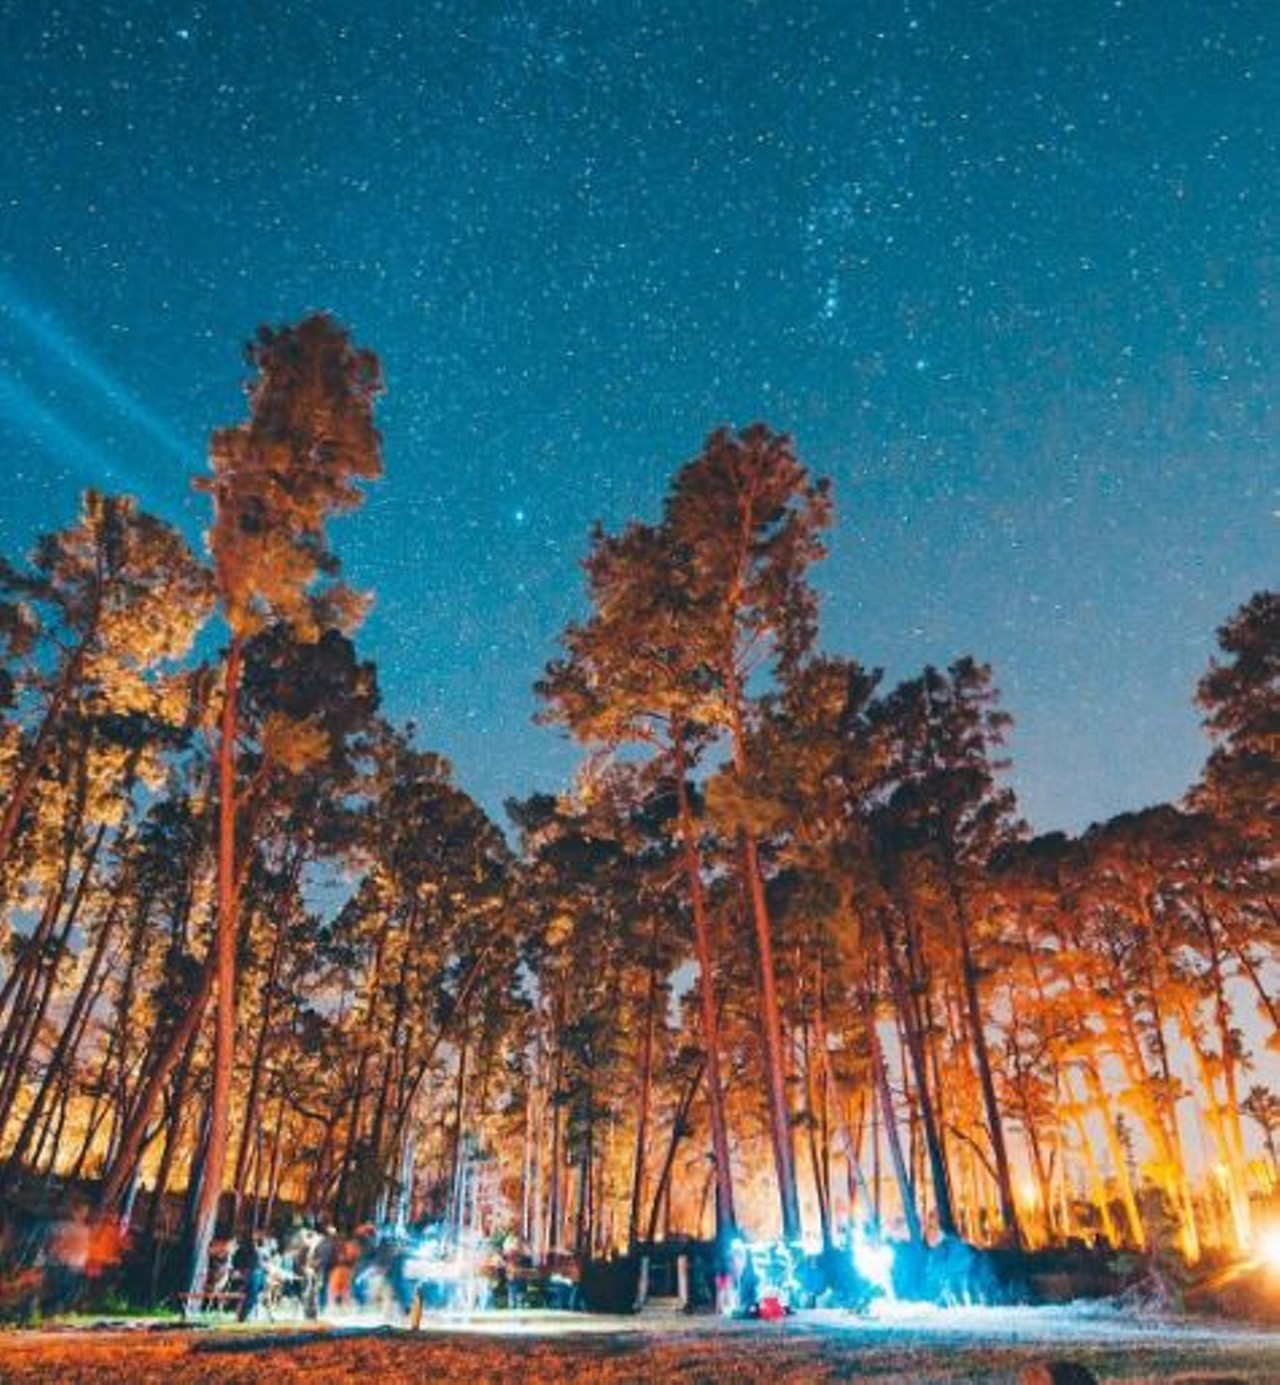 Bastrop State Park
100 Park Rd 1-A, Bastrop, tpwd.texas.gov/state-parks/bastrop
Planning a big party? Rent out the on-site dining hall for the festivities and end the night gushing over the moon&#146;s beauty.
Photo via Instagram, unsighted